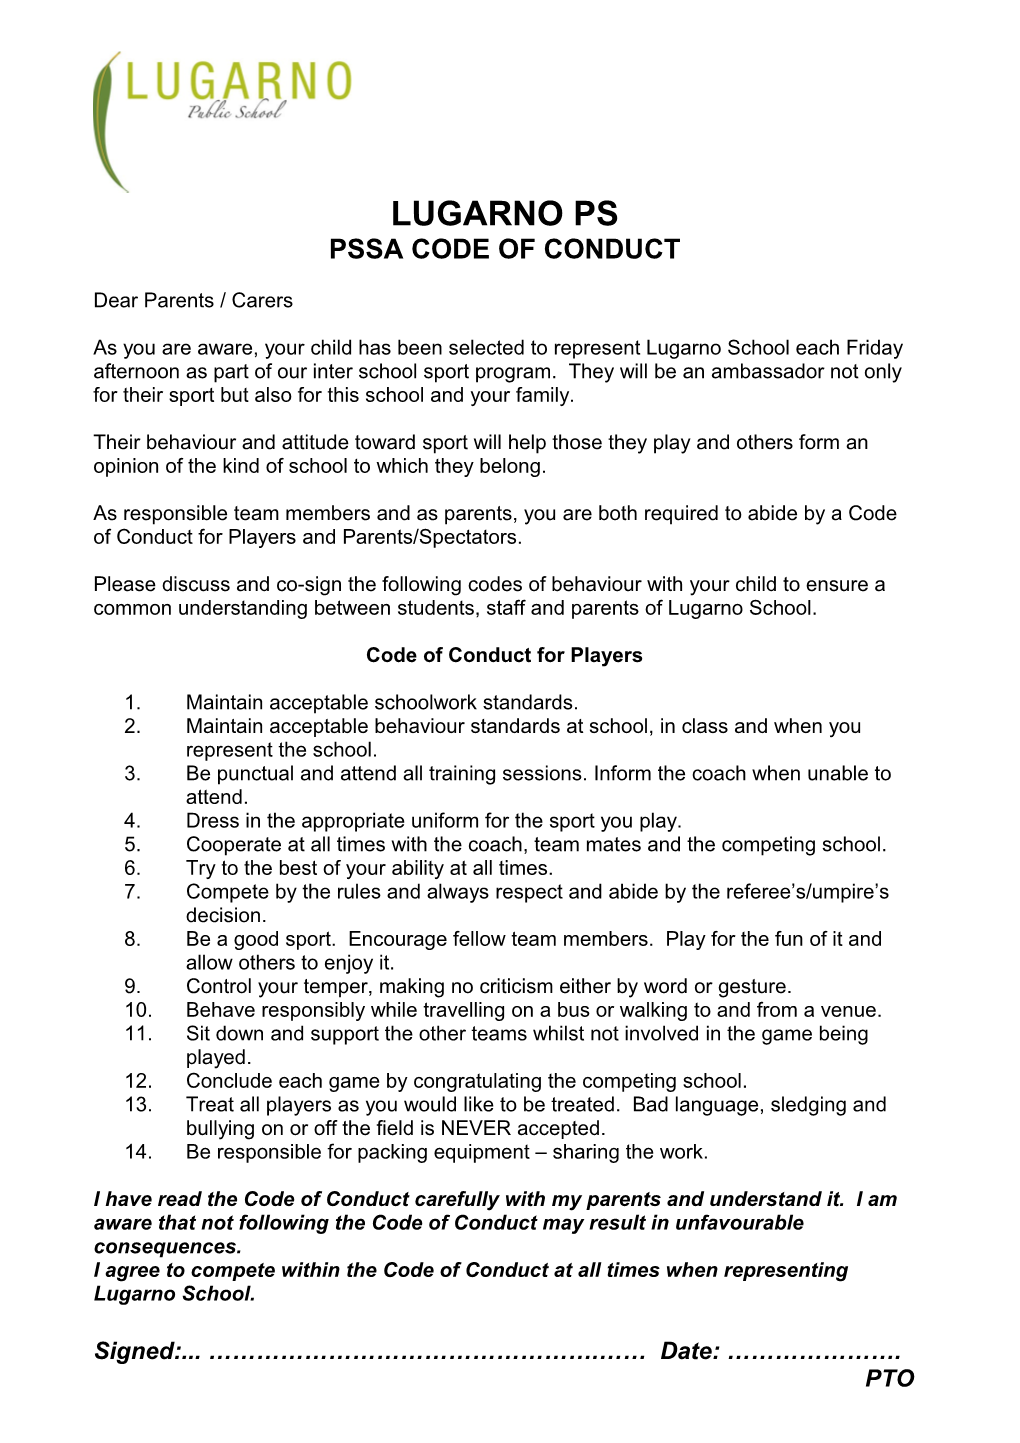 Pssa Code of Conduct